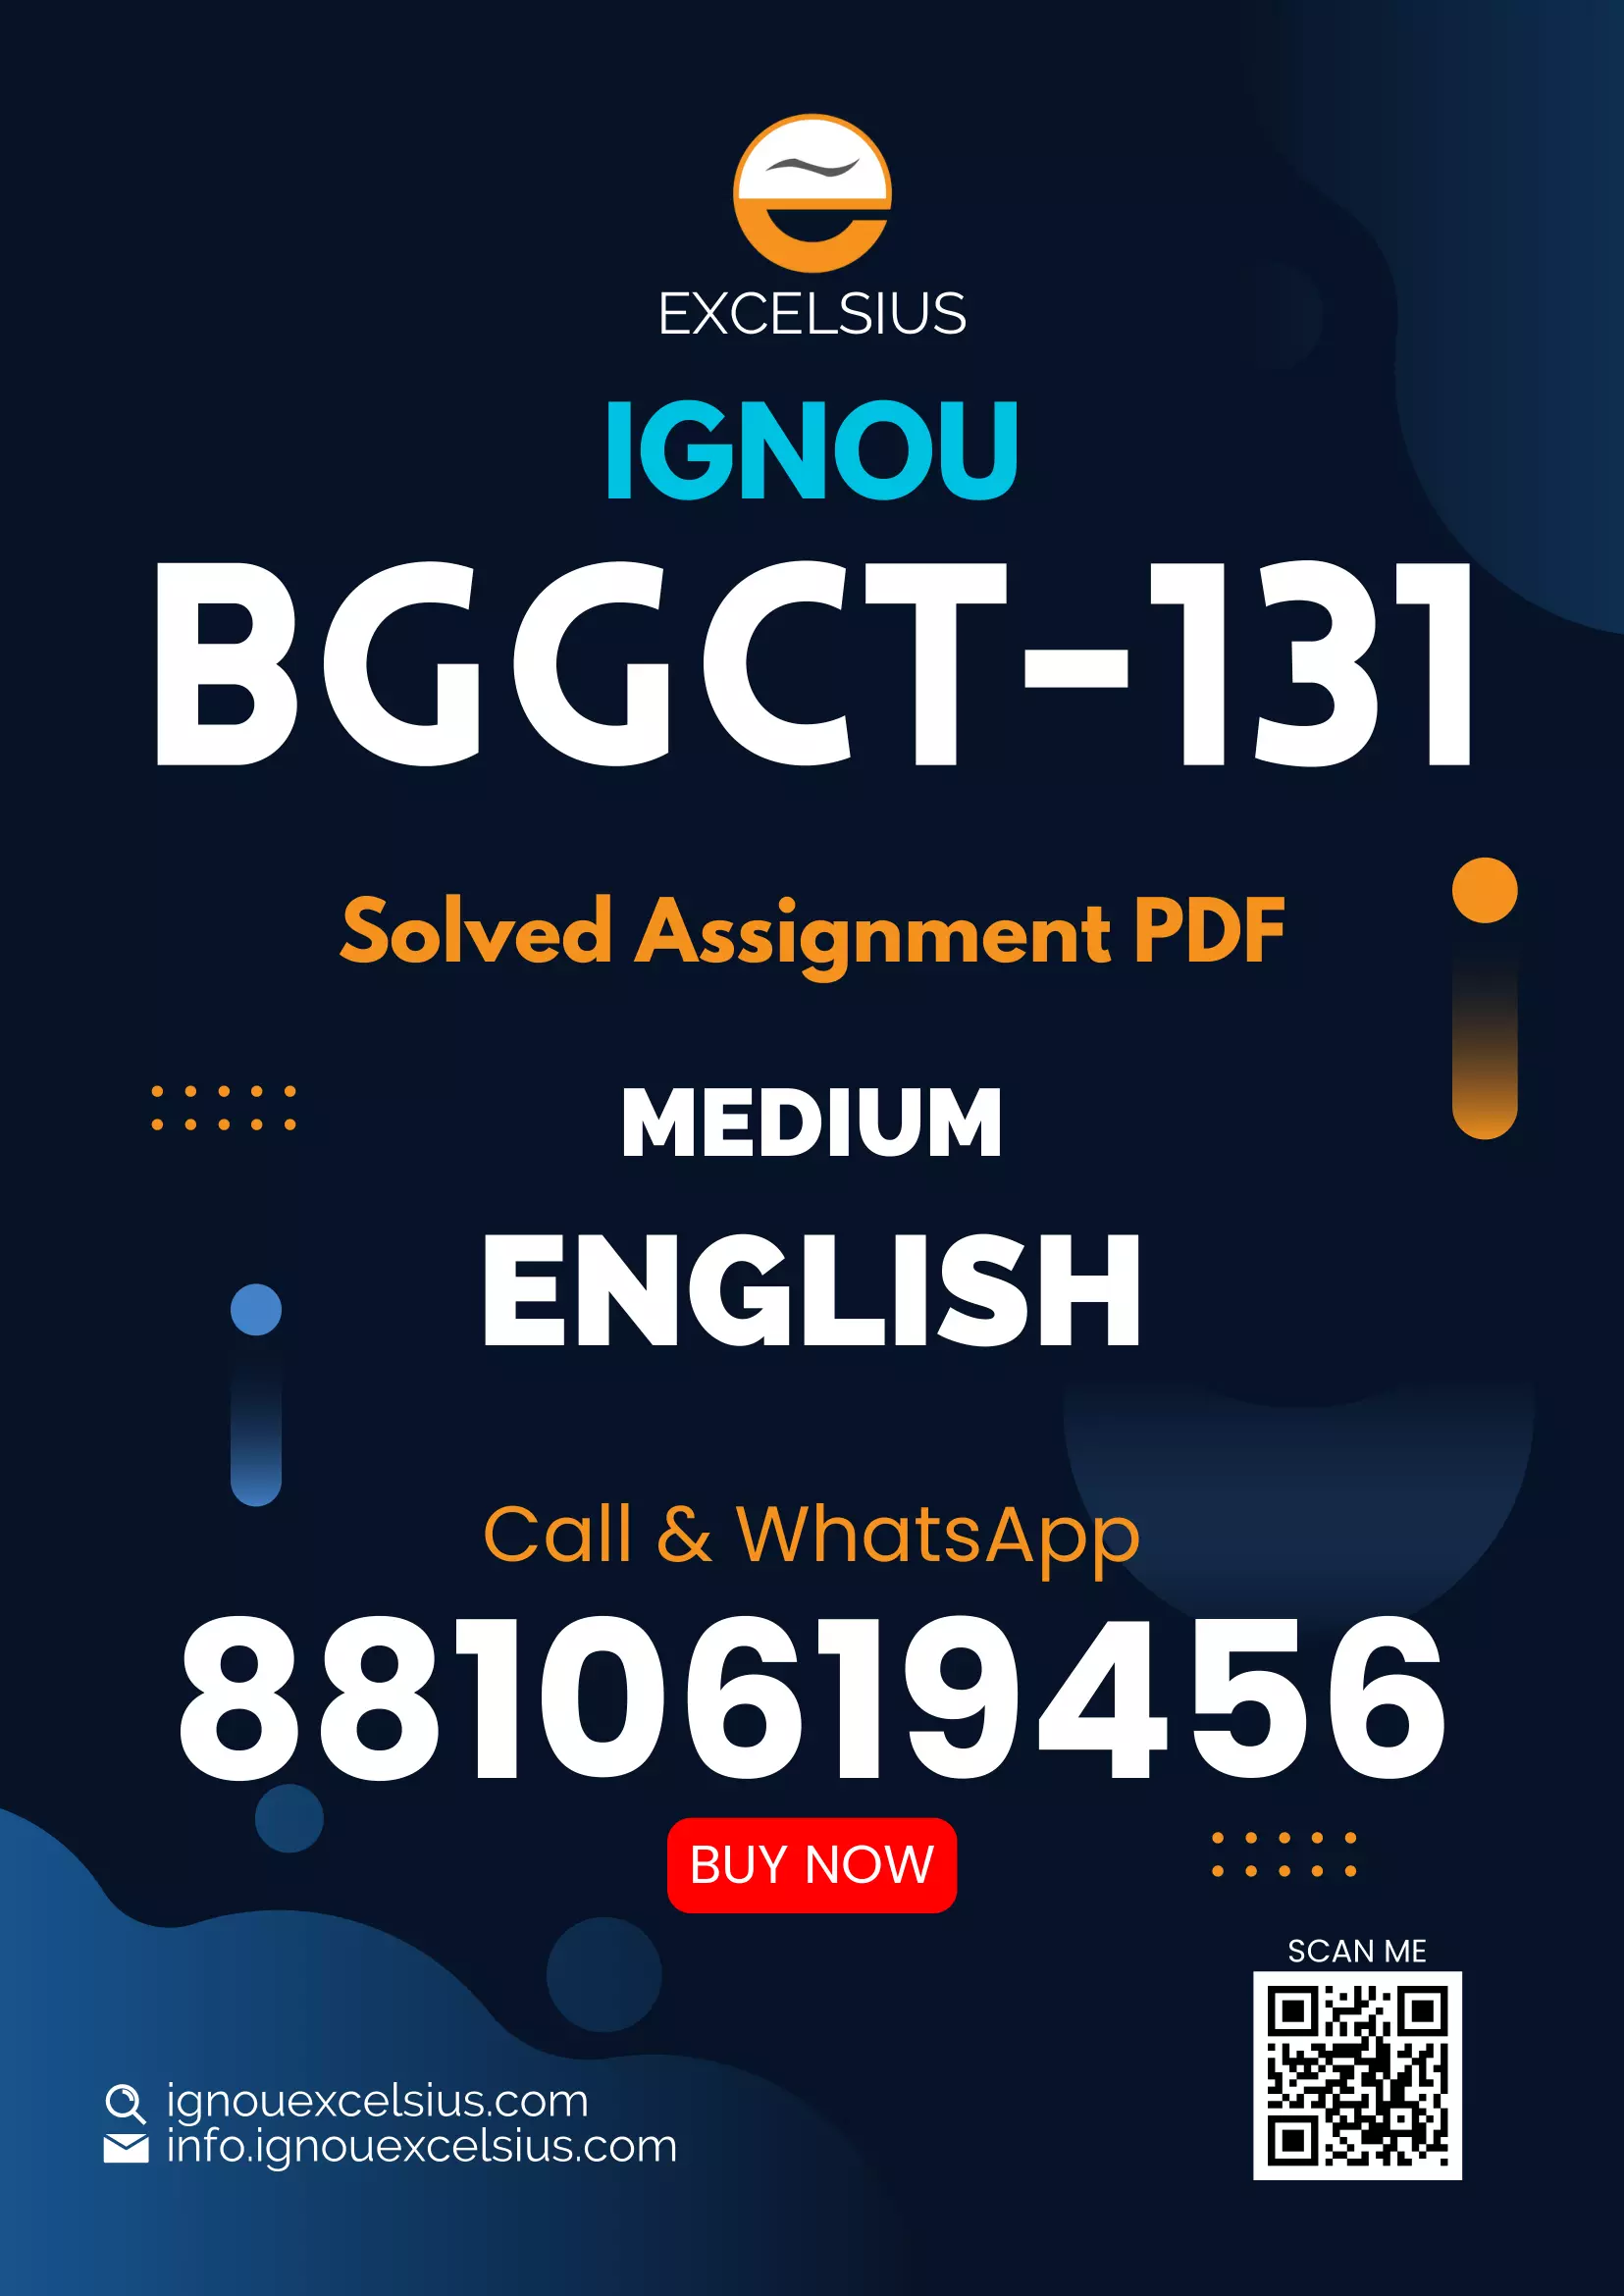 IGNOU BGGCT-131 - Physical Geography, Latest Solved Assignment-January 2023 - December 2023